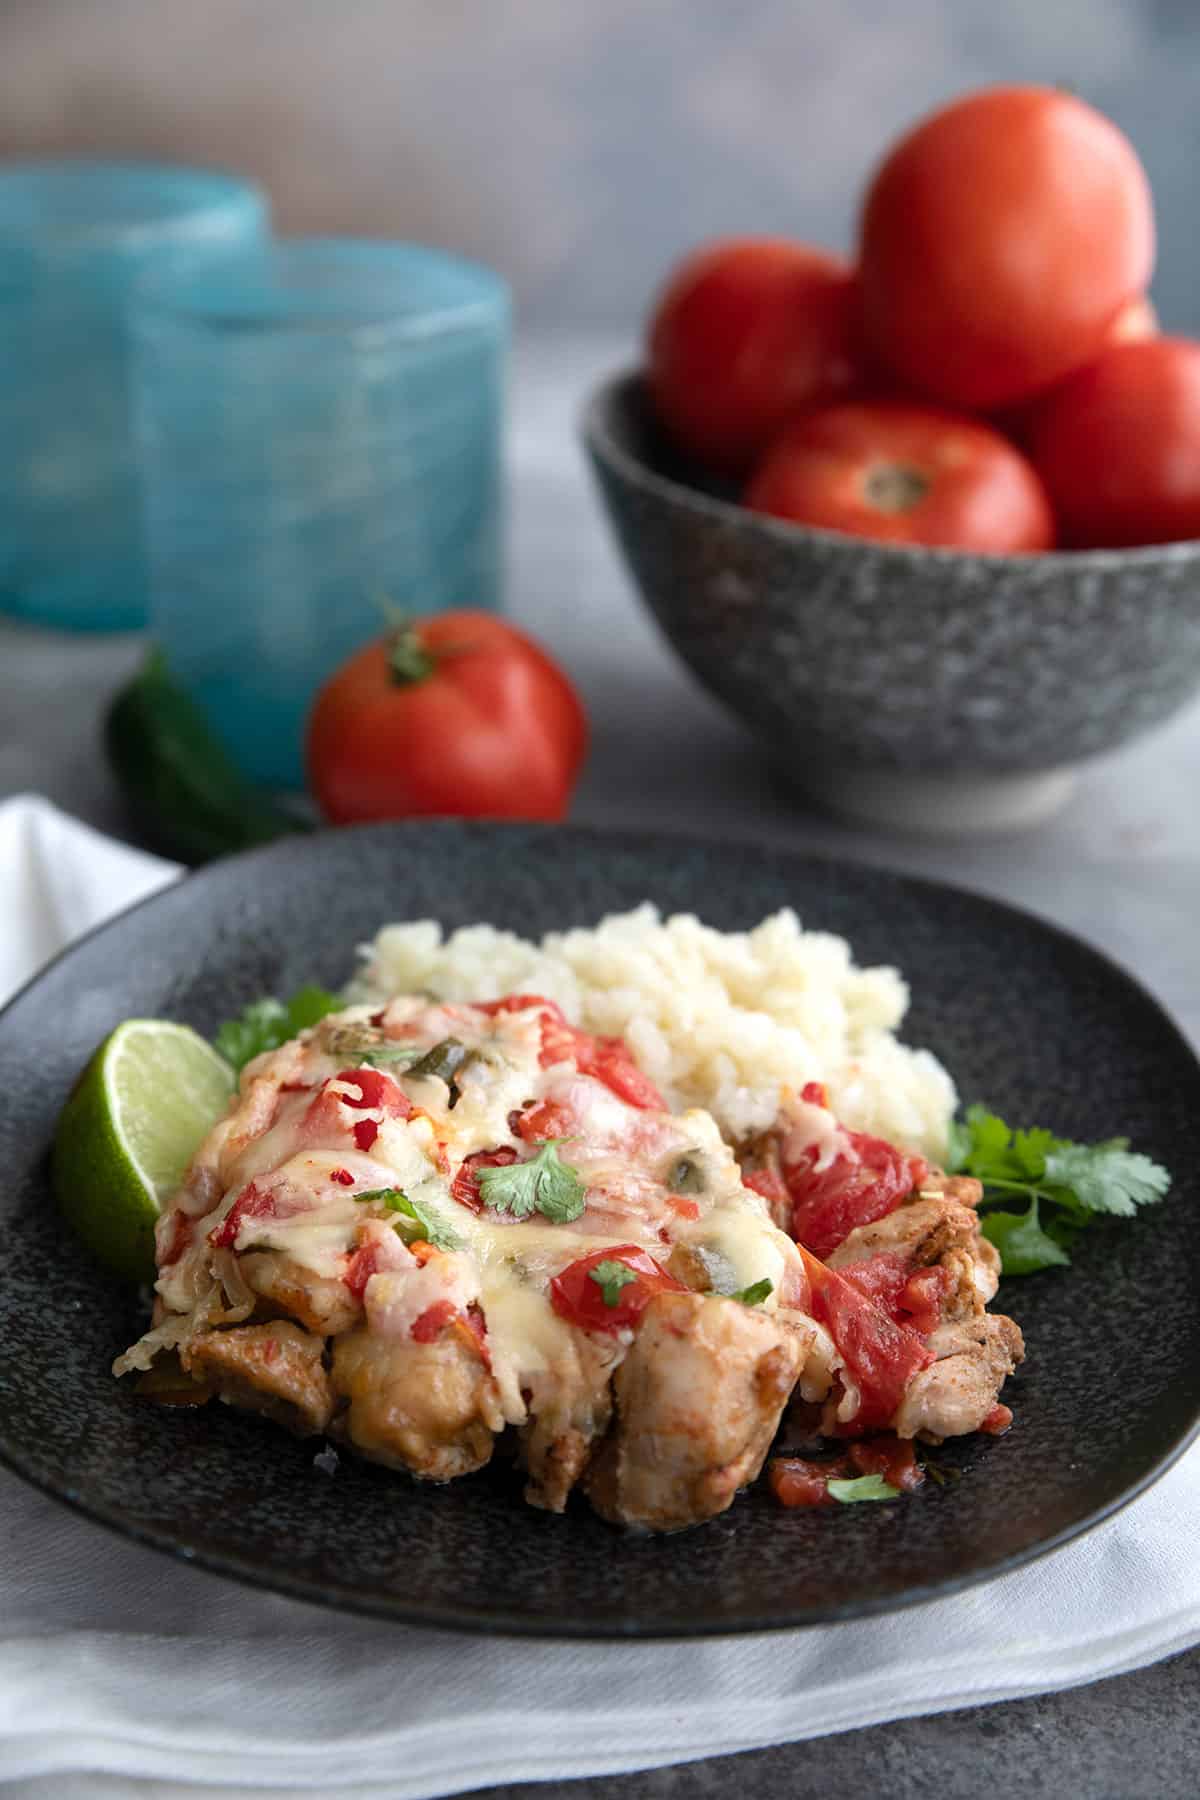 Salsa Fresca Chicken Bake on a plate with cauliflower rice, with a bowl of tomatoes in the background.